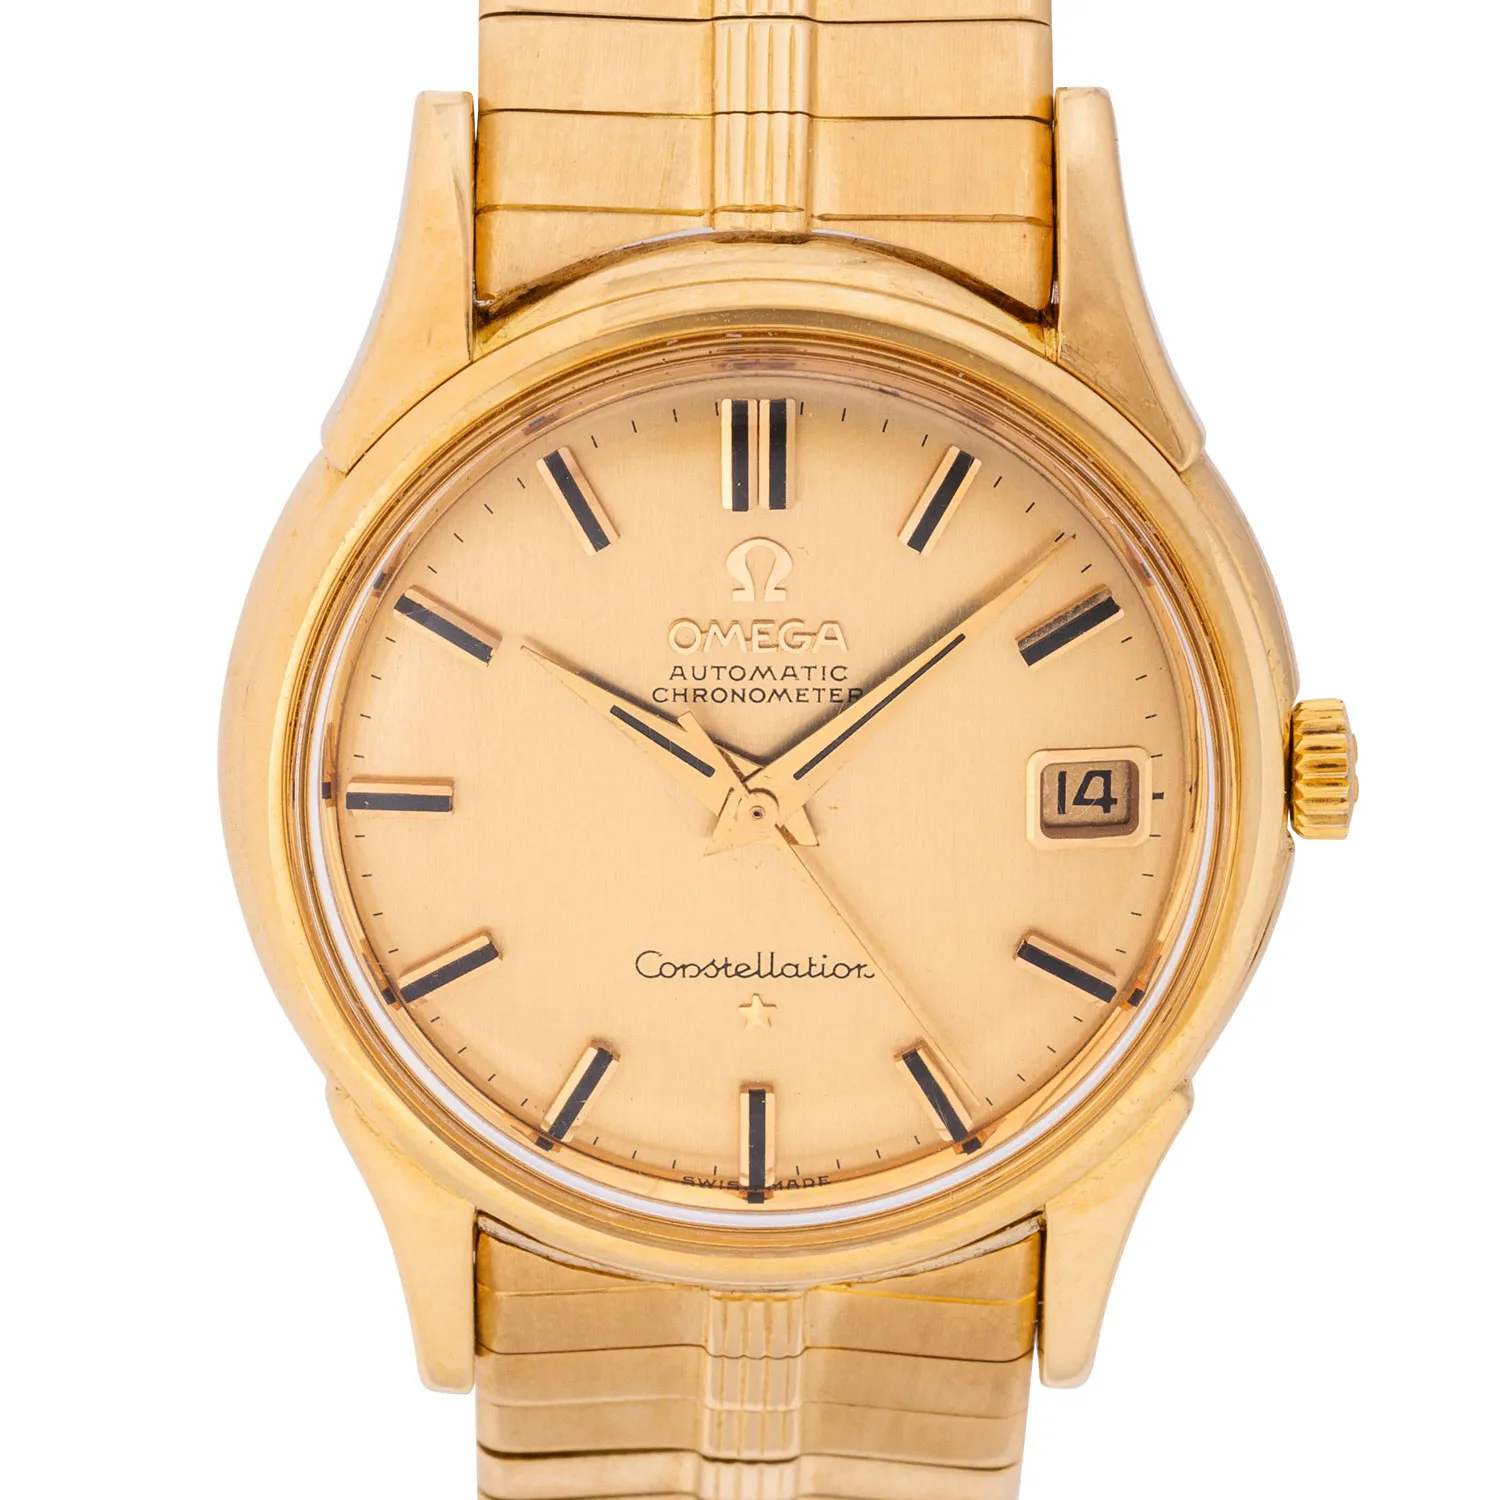 Omega Constellation 14393 35mm Yellow gold Gold